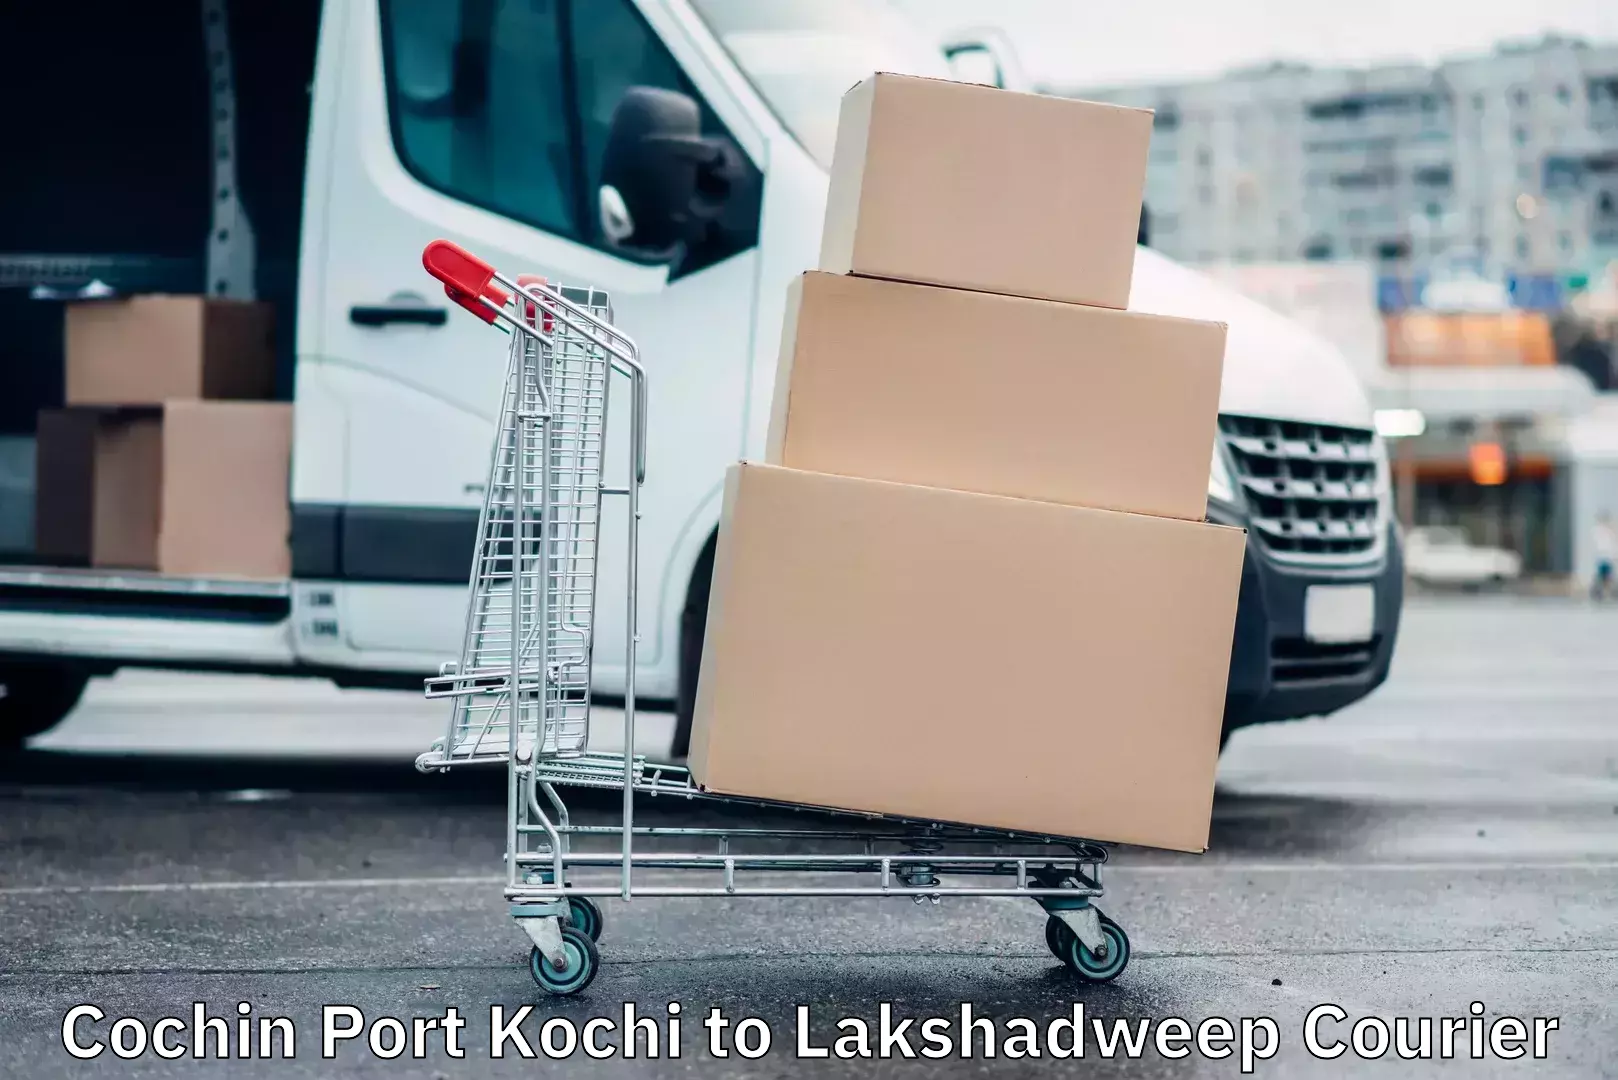 Nationwide parcel services Cochin Port Kochi to Lakshadweep